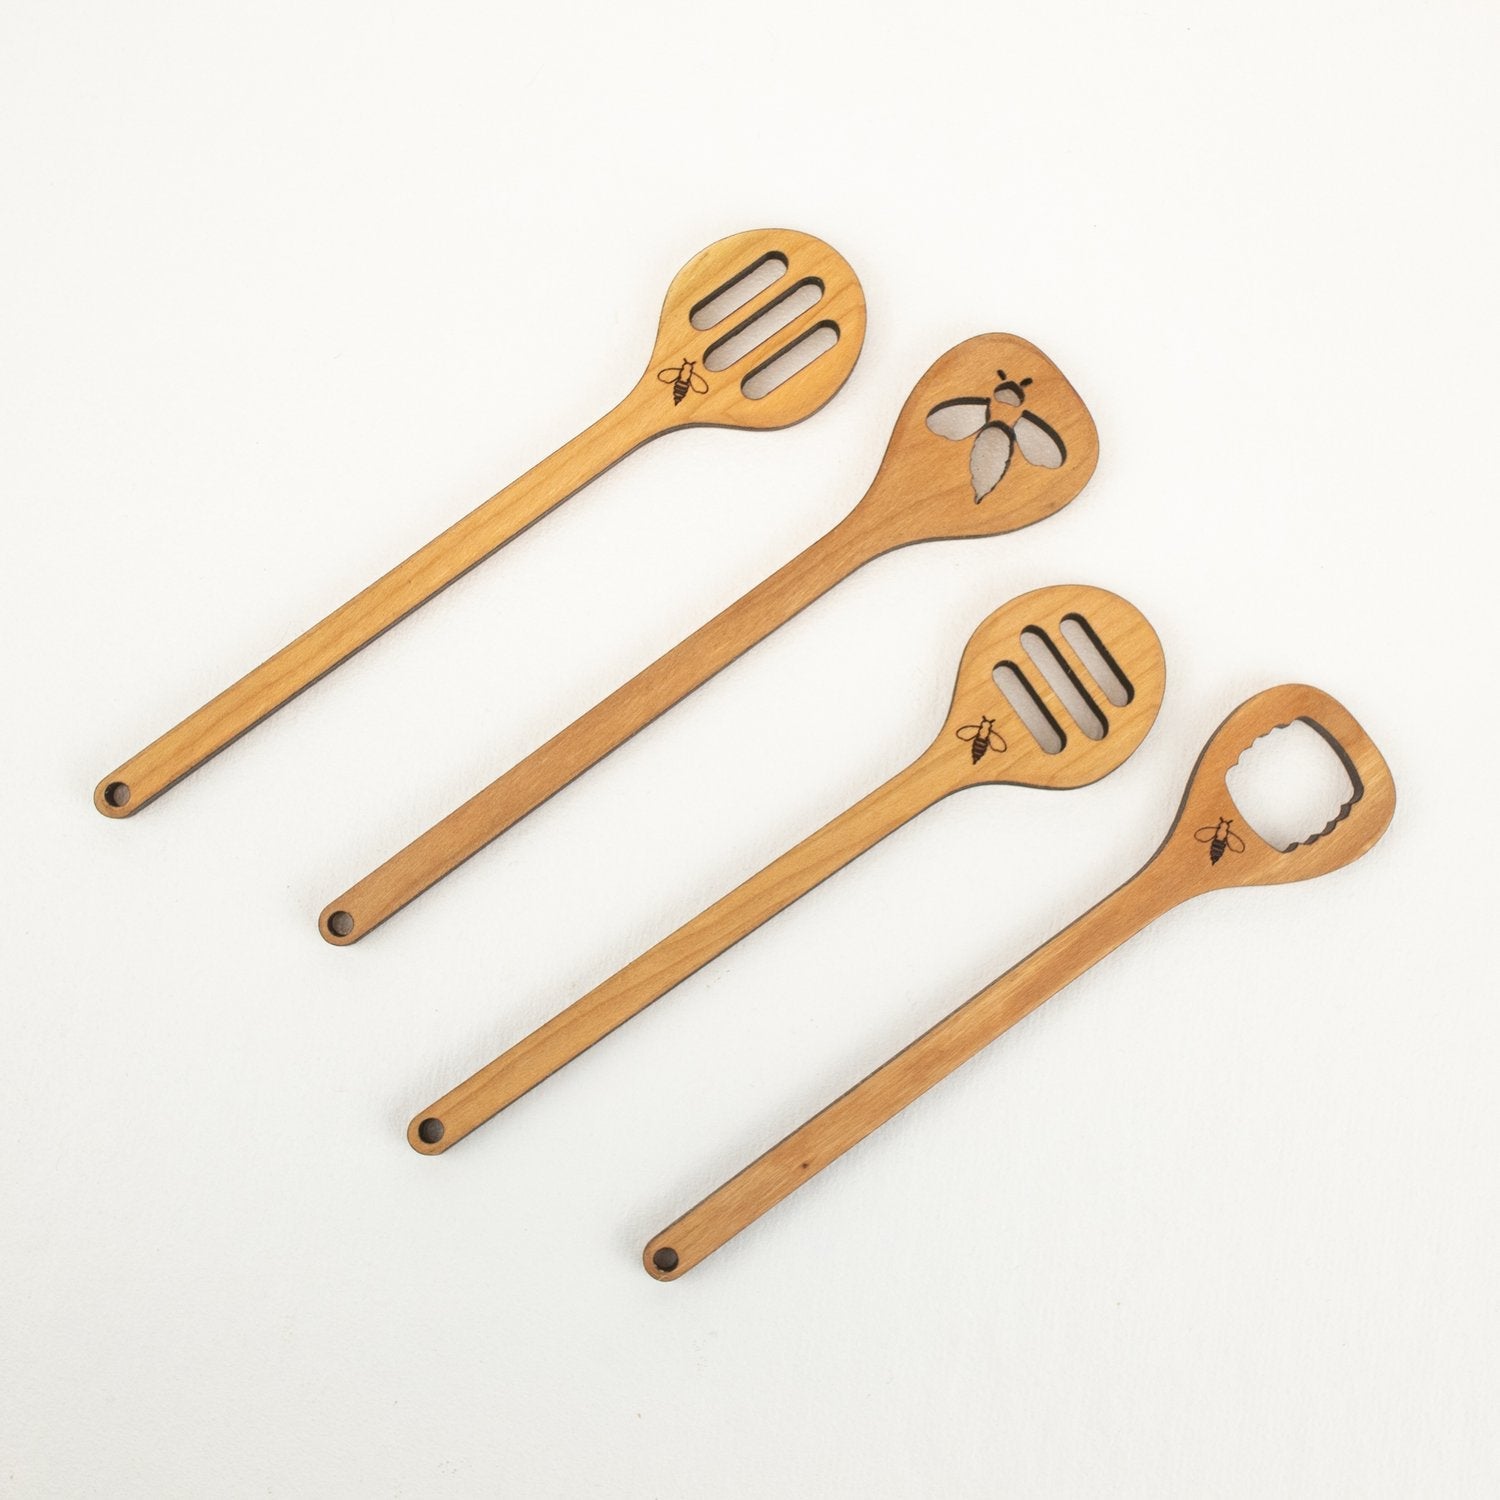 https://cdn.shopify.com/s/files/1/0641/8743/3181/products/wooden-honey-dipper-spoon-with-cutout-pattern-297192_1600x1600_crop_center.jpg?v=1695957713